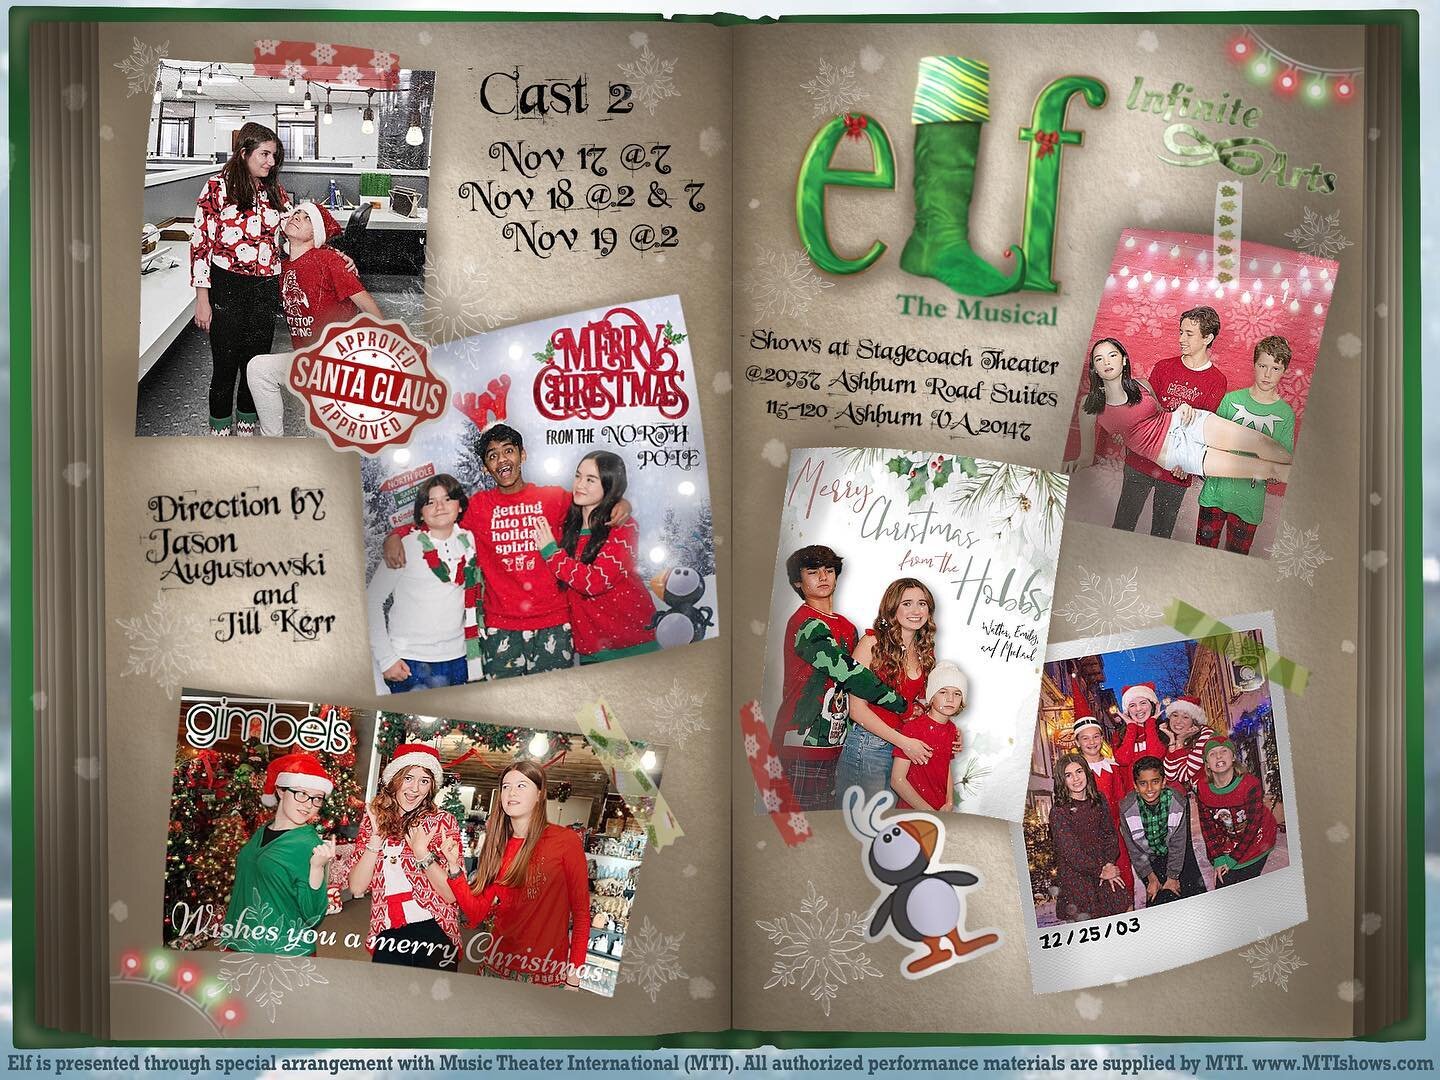 Cast 2 from Nov 17-19 of Elf is ready to get their Christmas song on! 
Buy your tickets now at https://ci.ovationtix.com/36598/production/1182536

Poster by @sydney_diglet 
Photos by @vawinds4